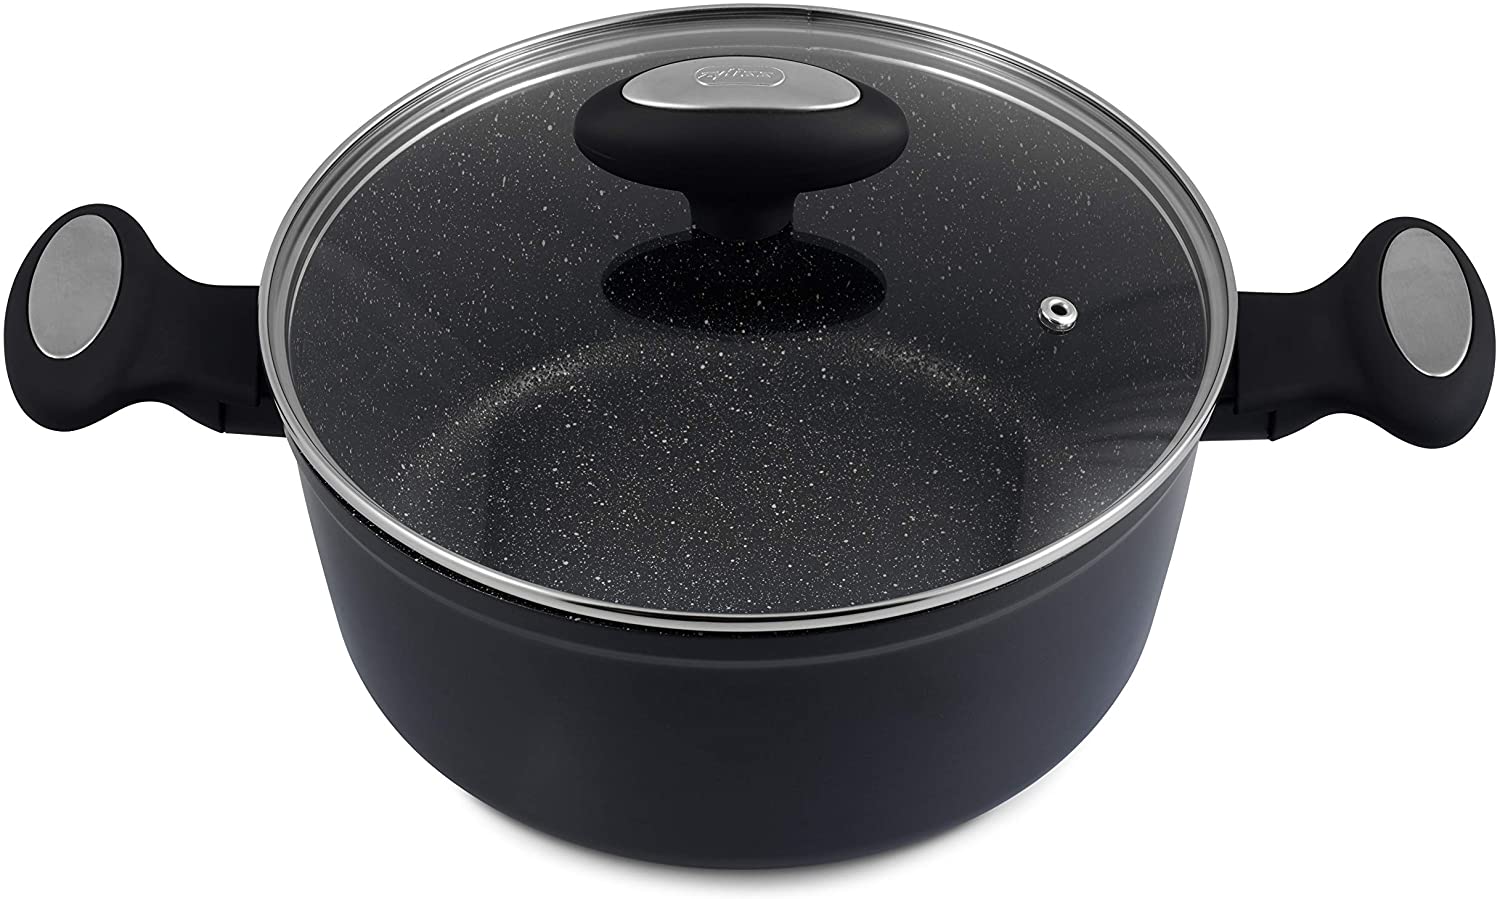 Zyliss Cook ZE980142 Cooking Pot with Non-Stick Coating